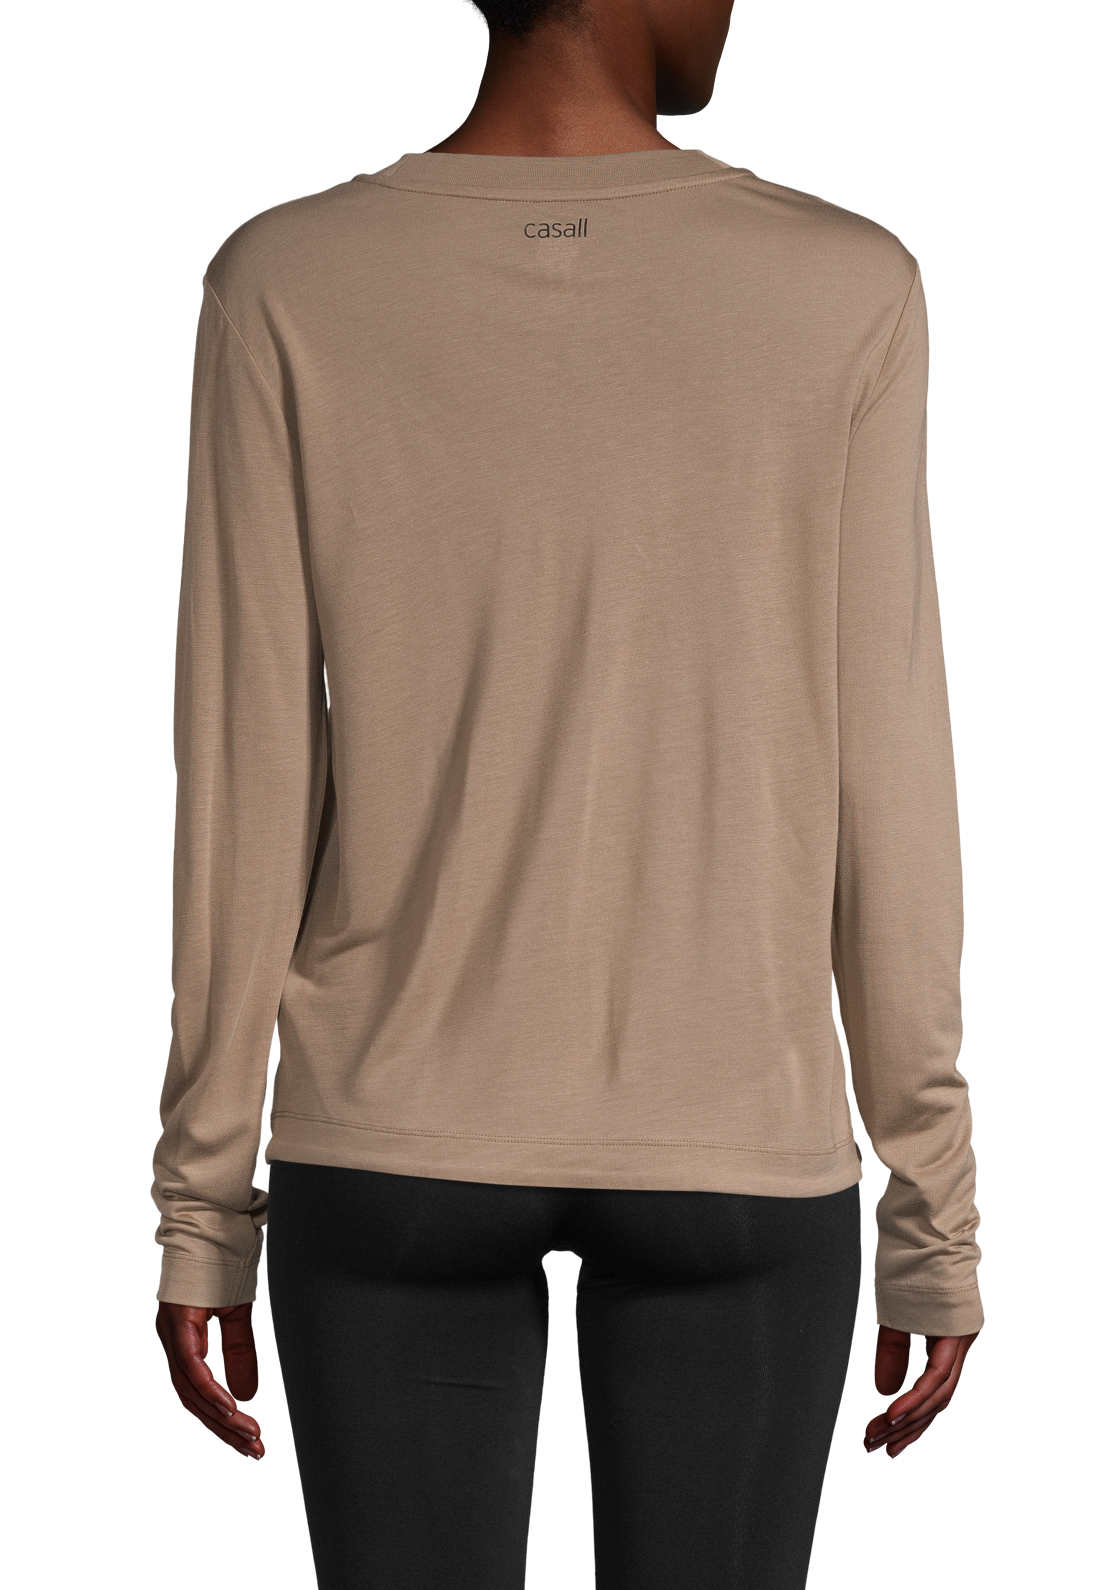 Ease Crew Neck - Taupe Grey